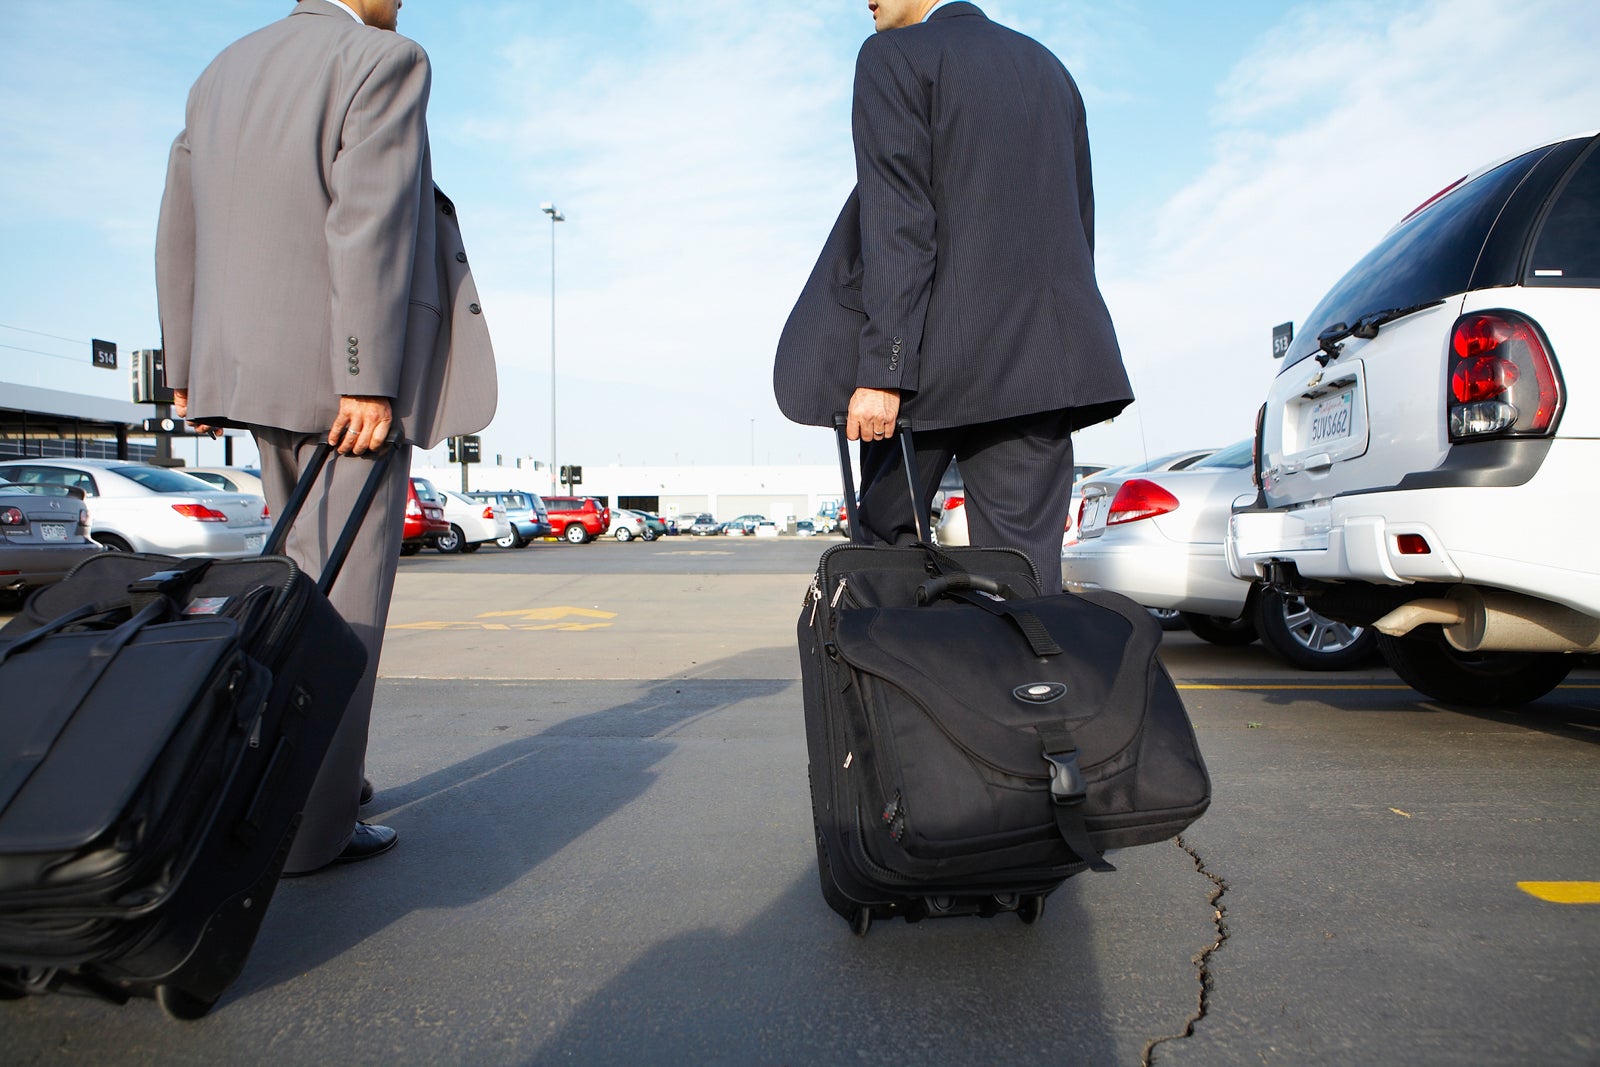 Two business men pulling suitcases through car rental lot, rear view